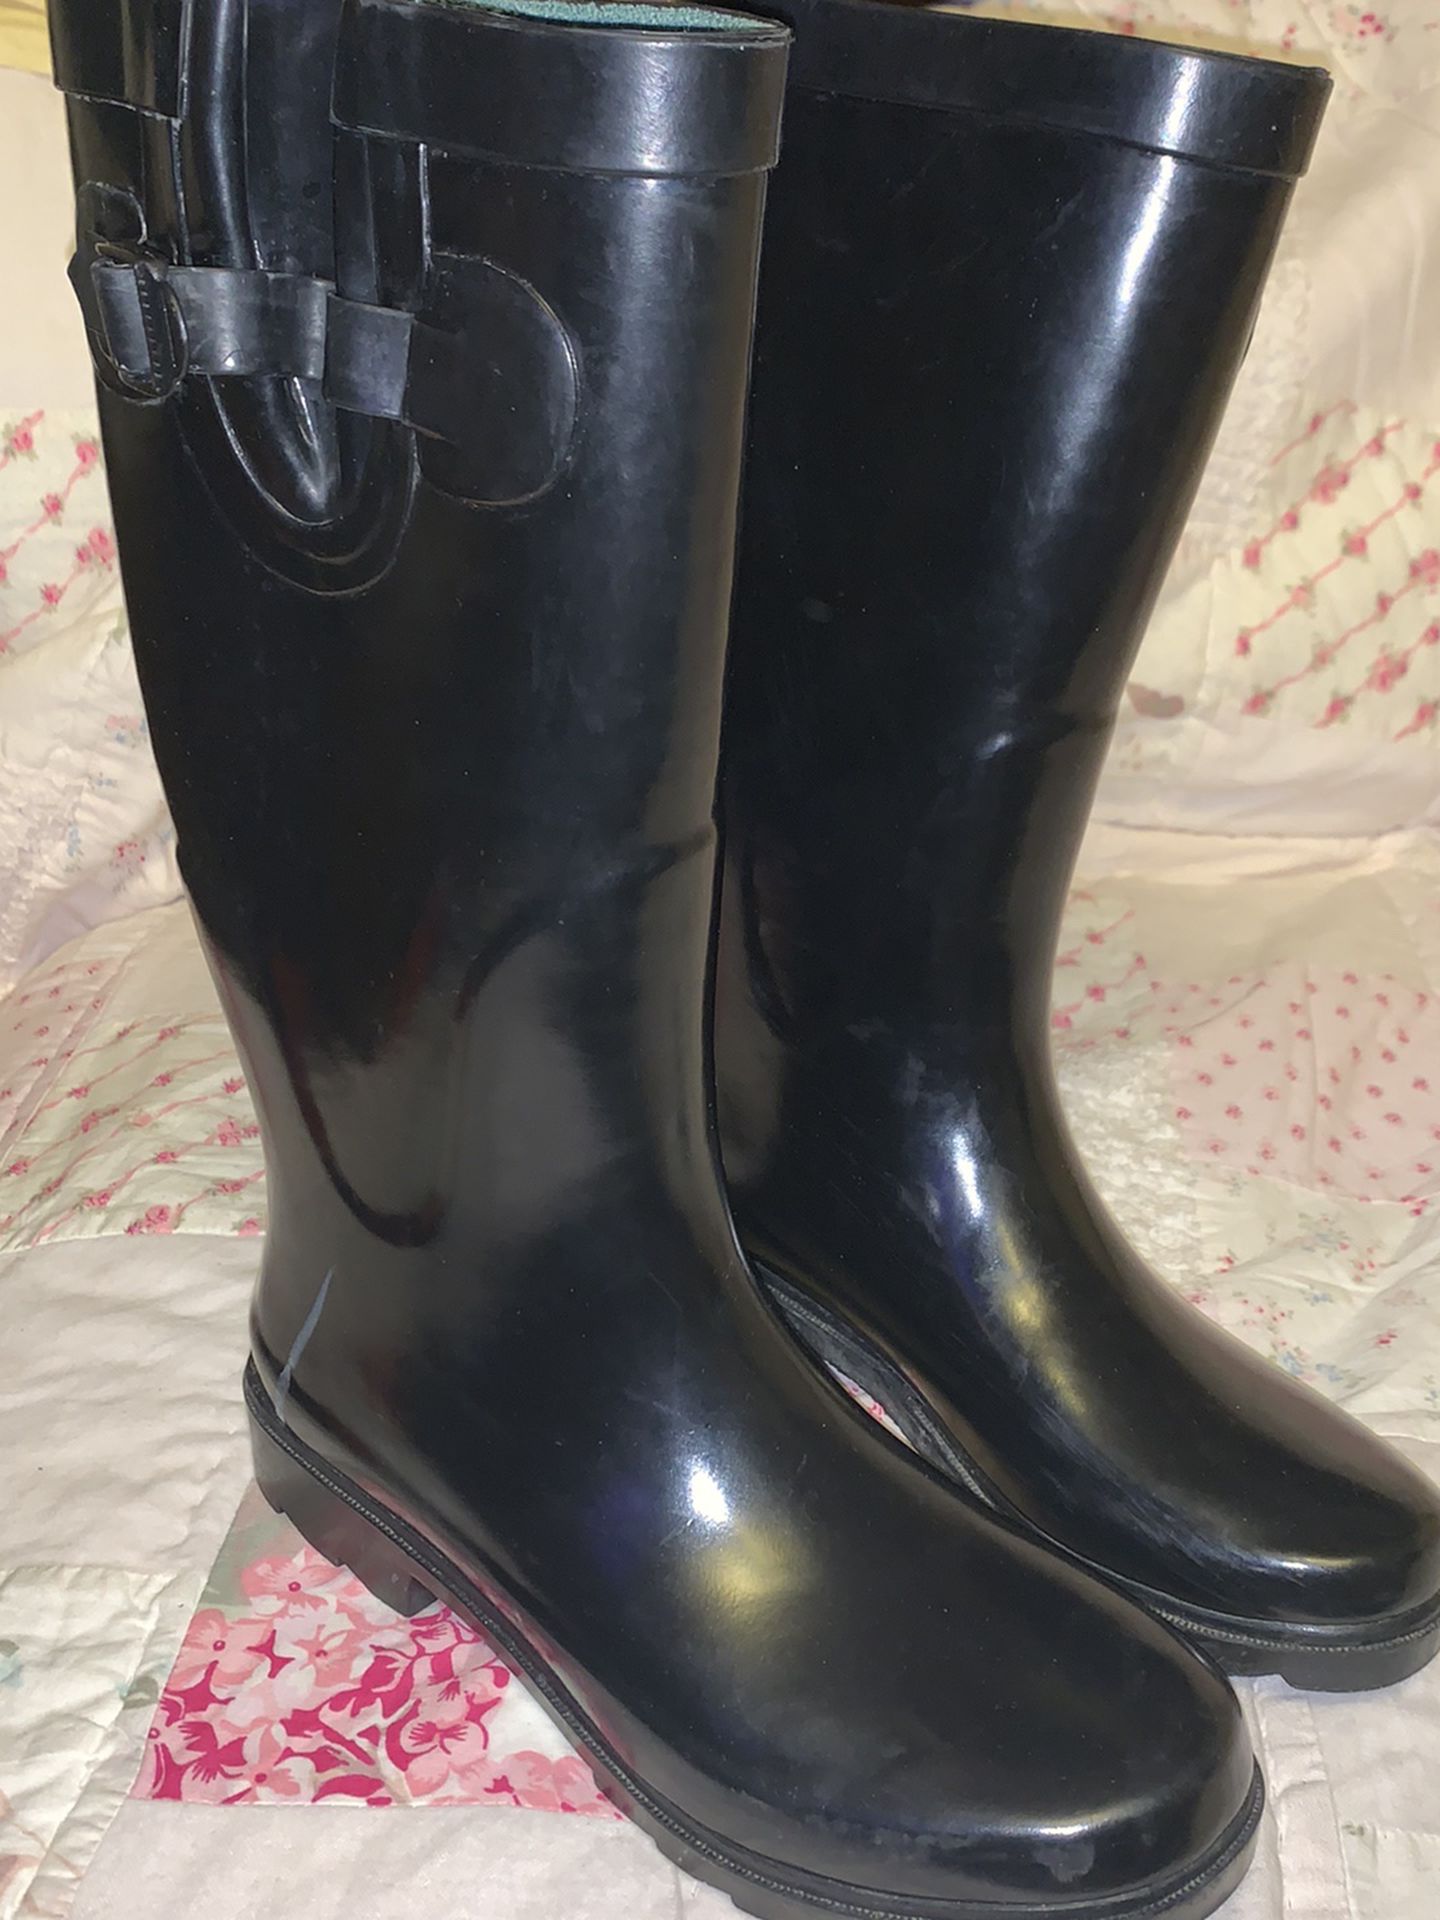 WOMAN’S CLARK RAIN BOOTS, SIZE 8, PRE-OWNED, IN EXCELLENT CONDITION